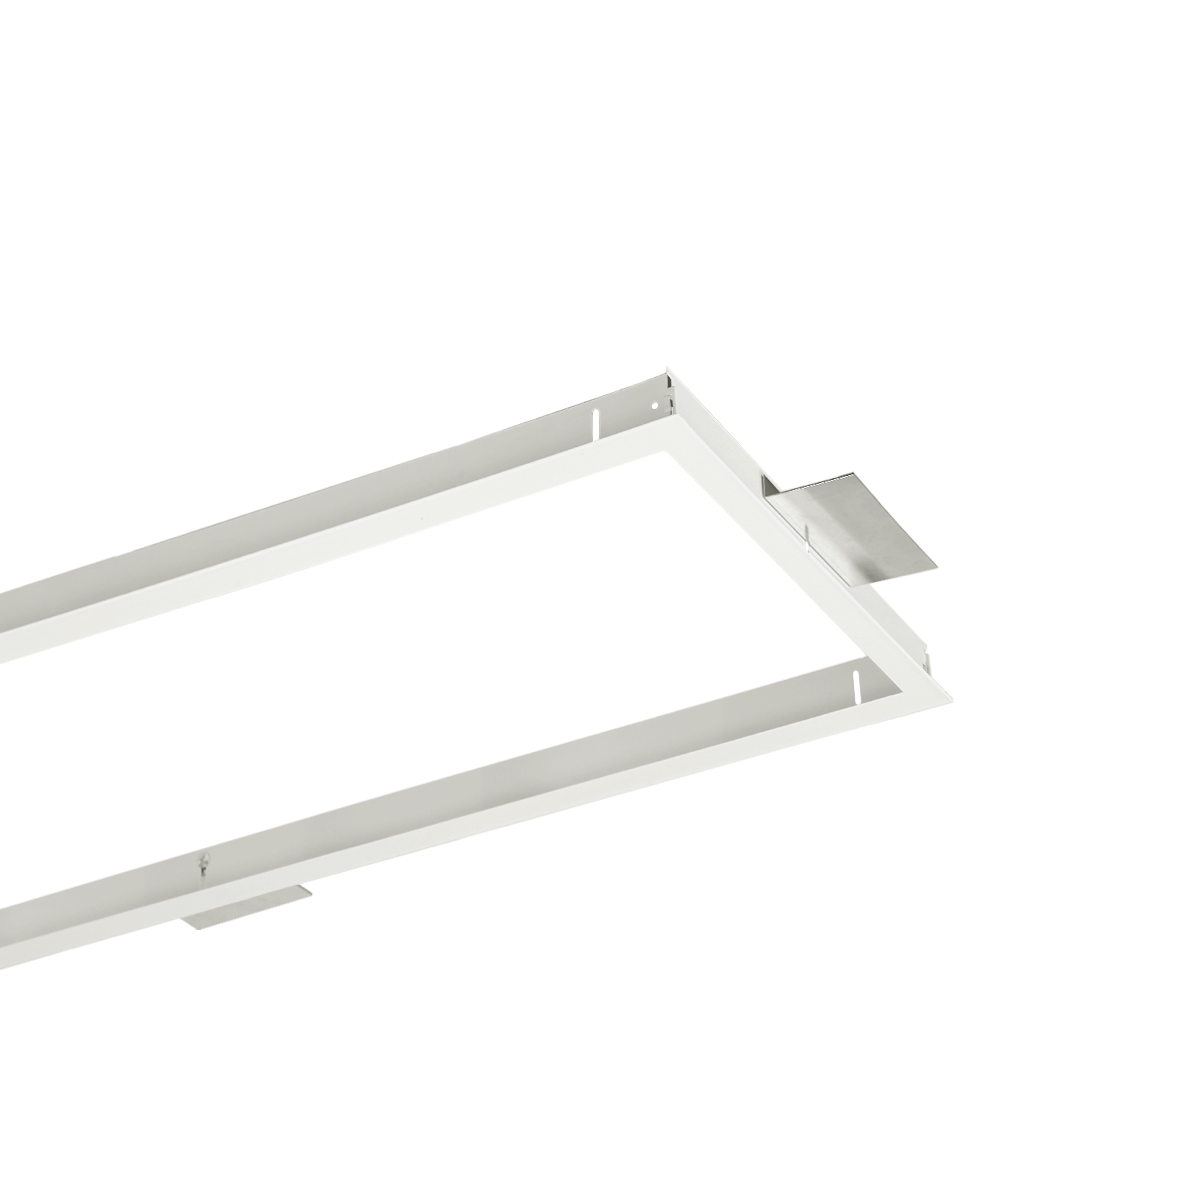 RECESSED FRAME UNIVERSAL 1200X600